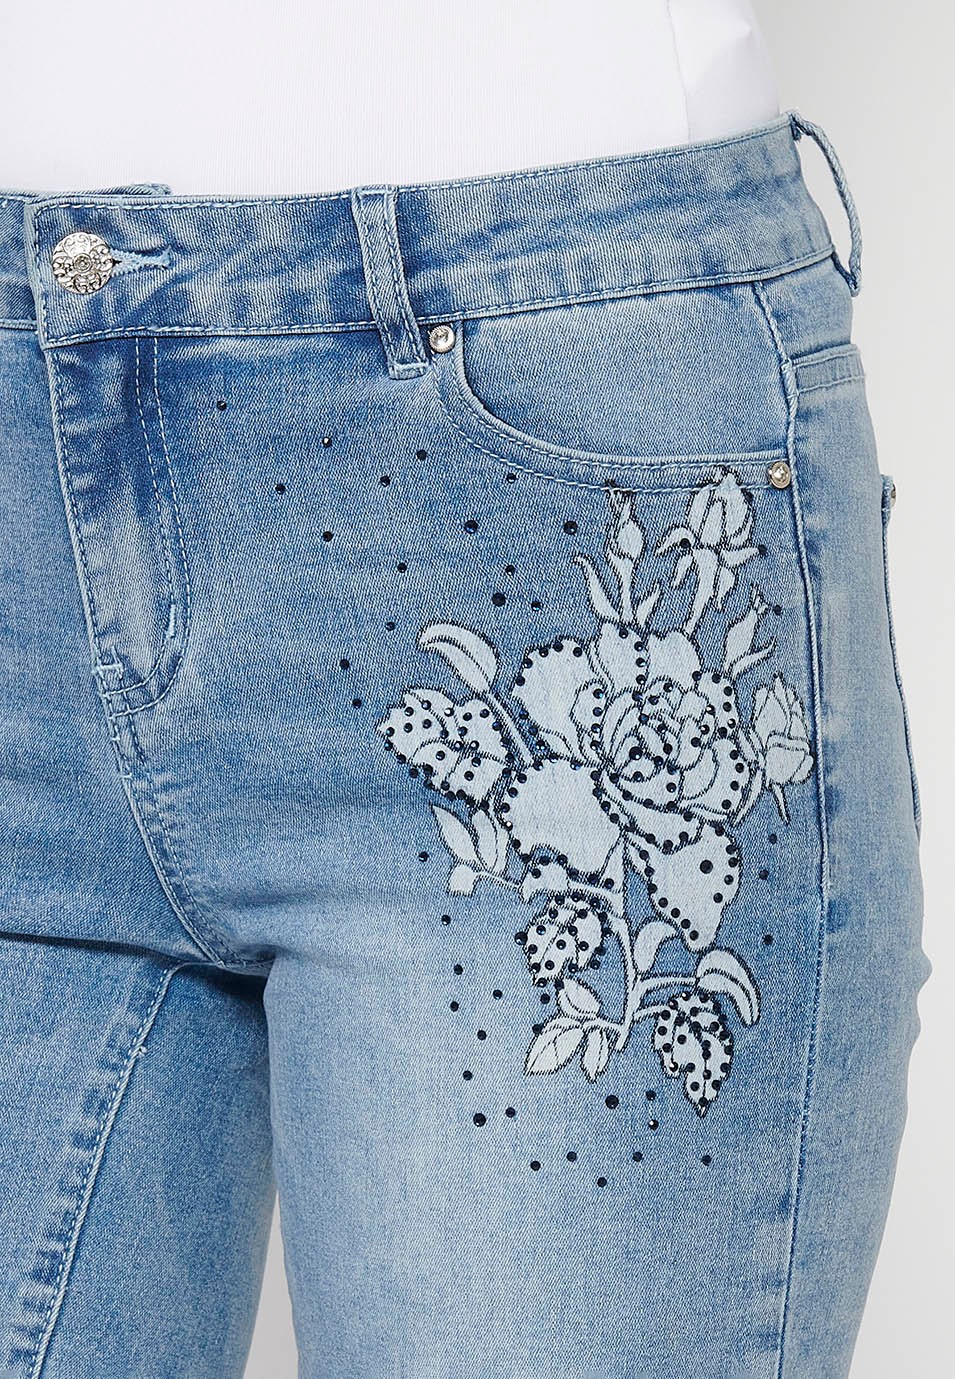 Shorts, floral embroidery, blue color for women